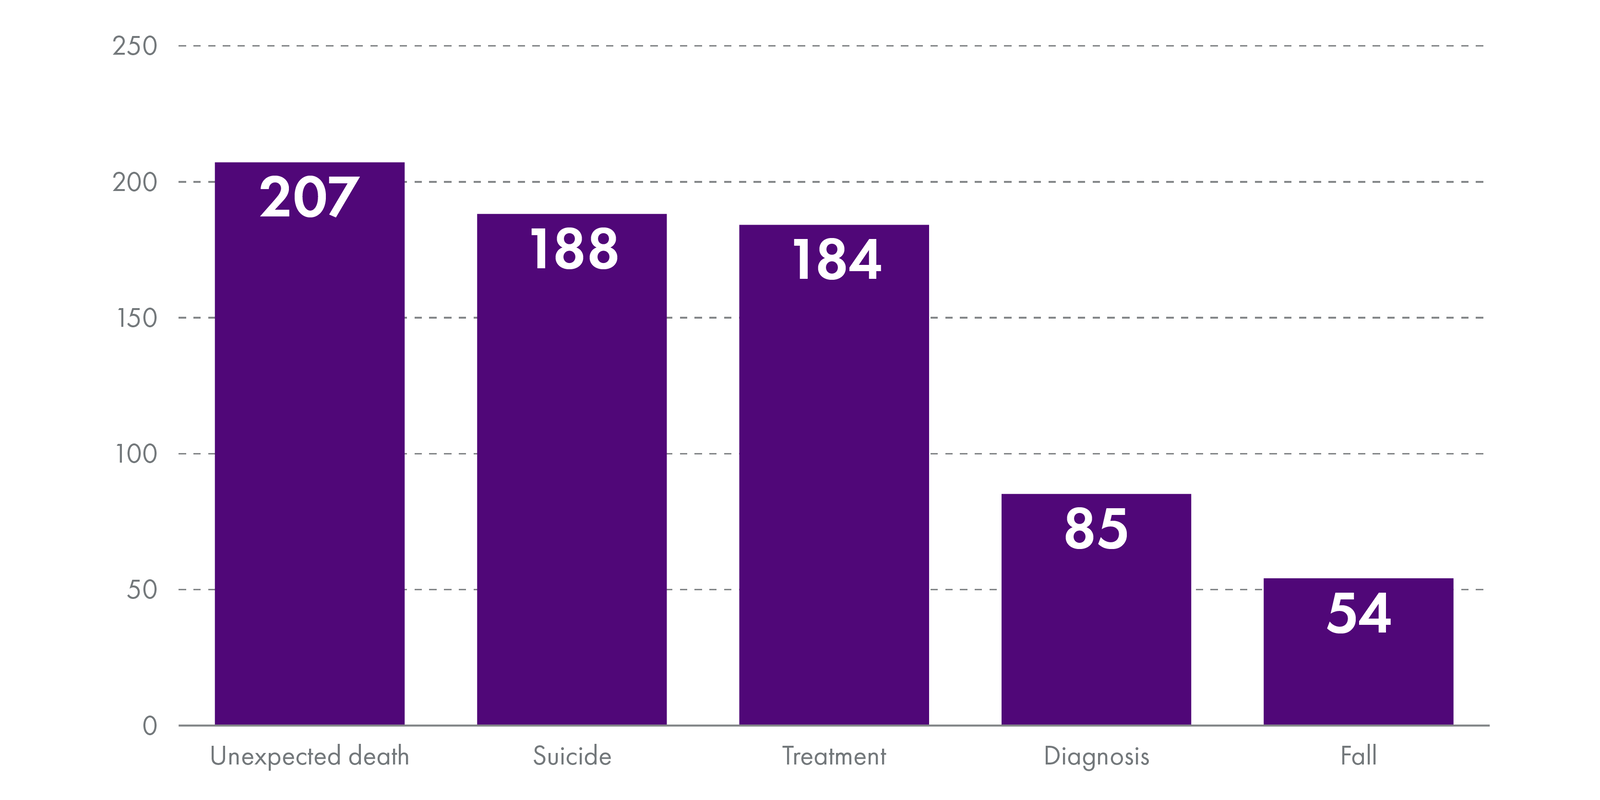 The bar graph shows the most common types of significant adverse event reported between January 2020 and October 2021. This shows there were 207 unexpected deaths, 188 suicide, 184 treatment problems, 85 diagnostic problems and 54 falls.